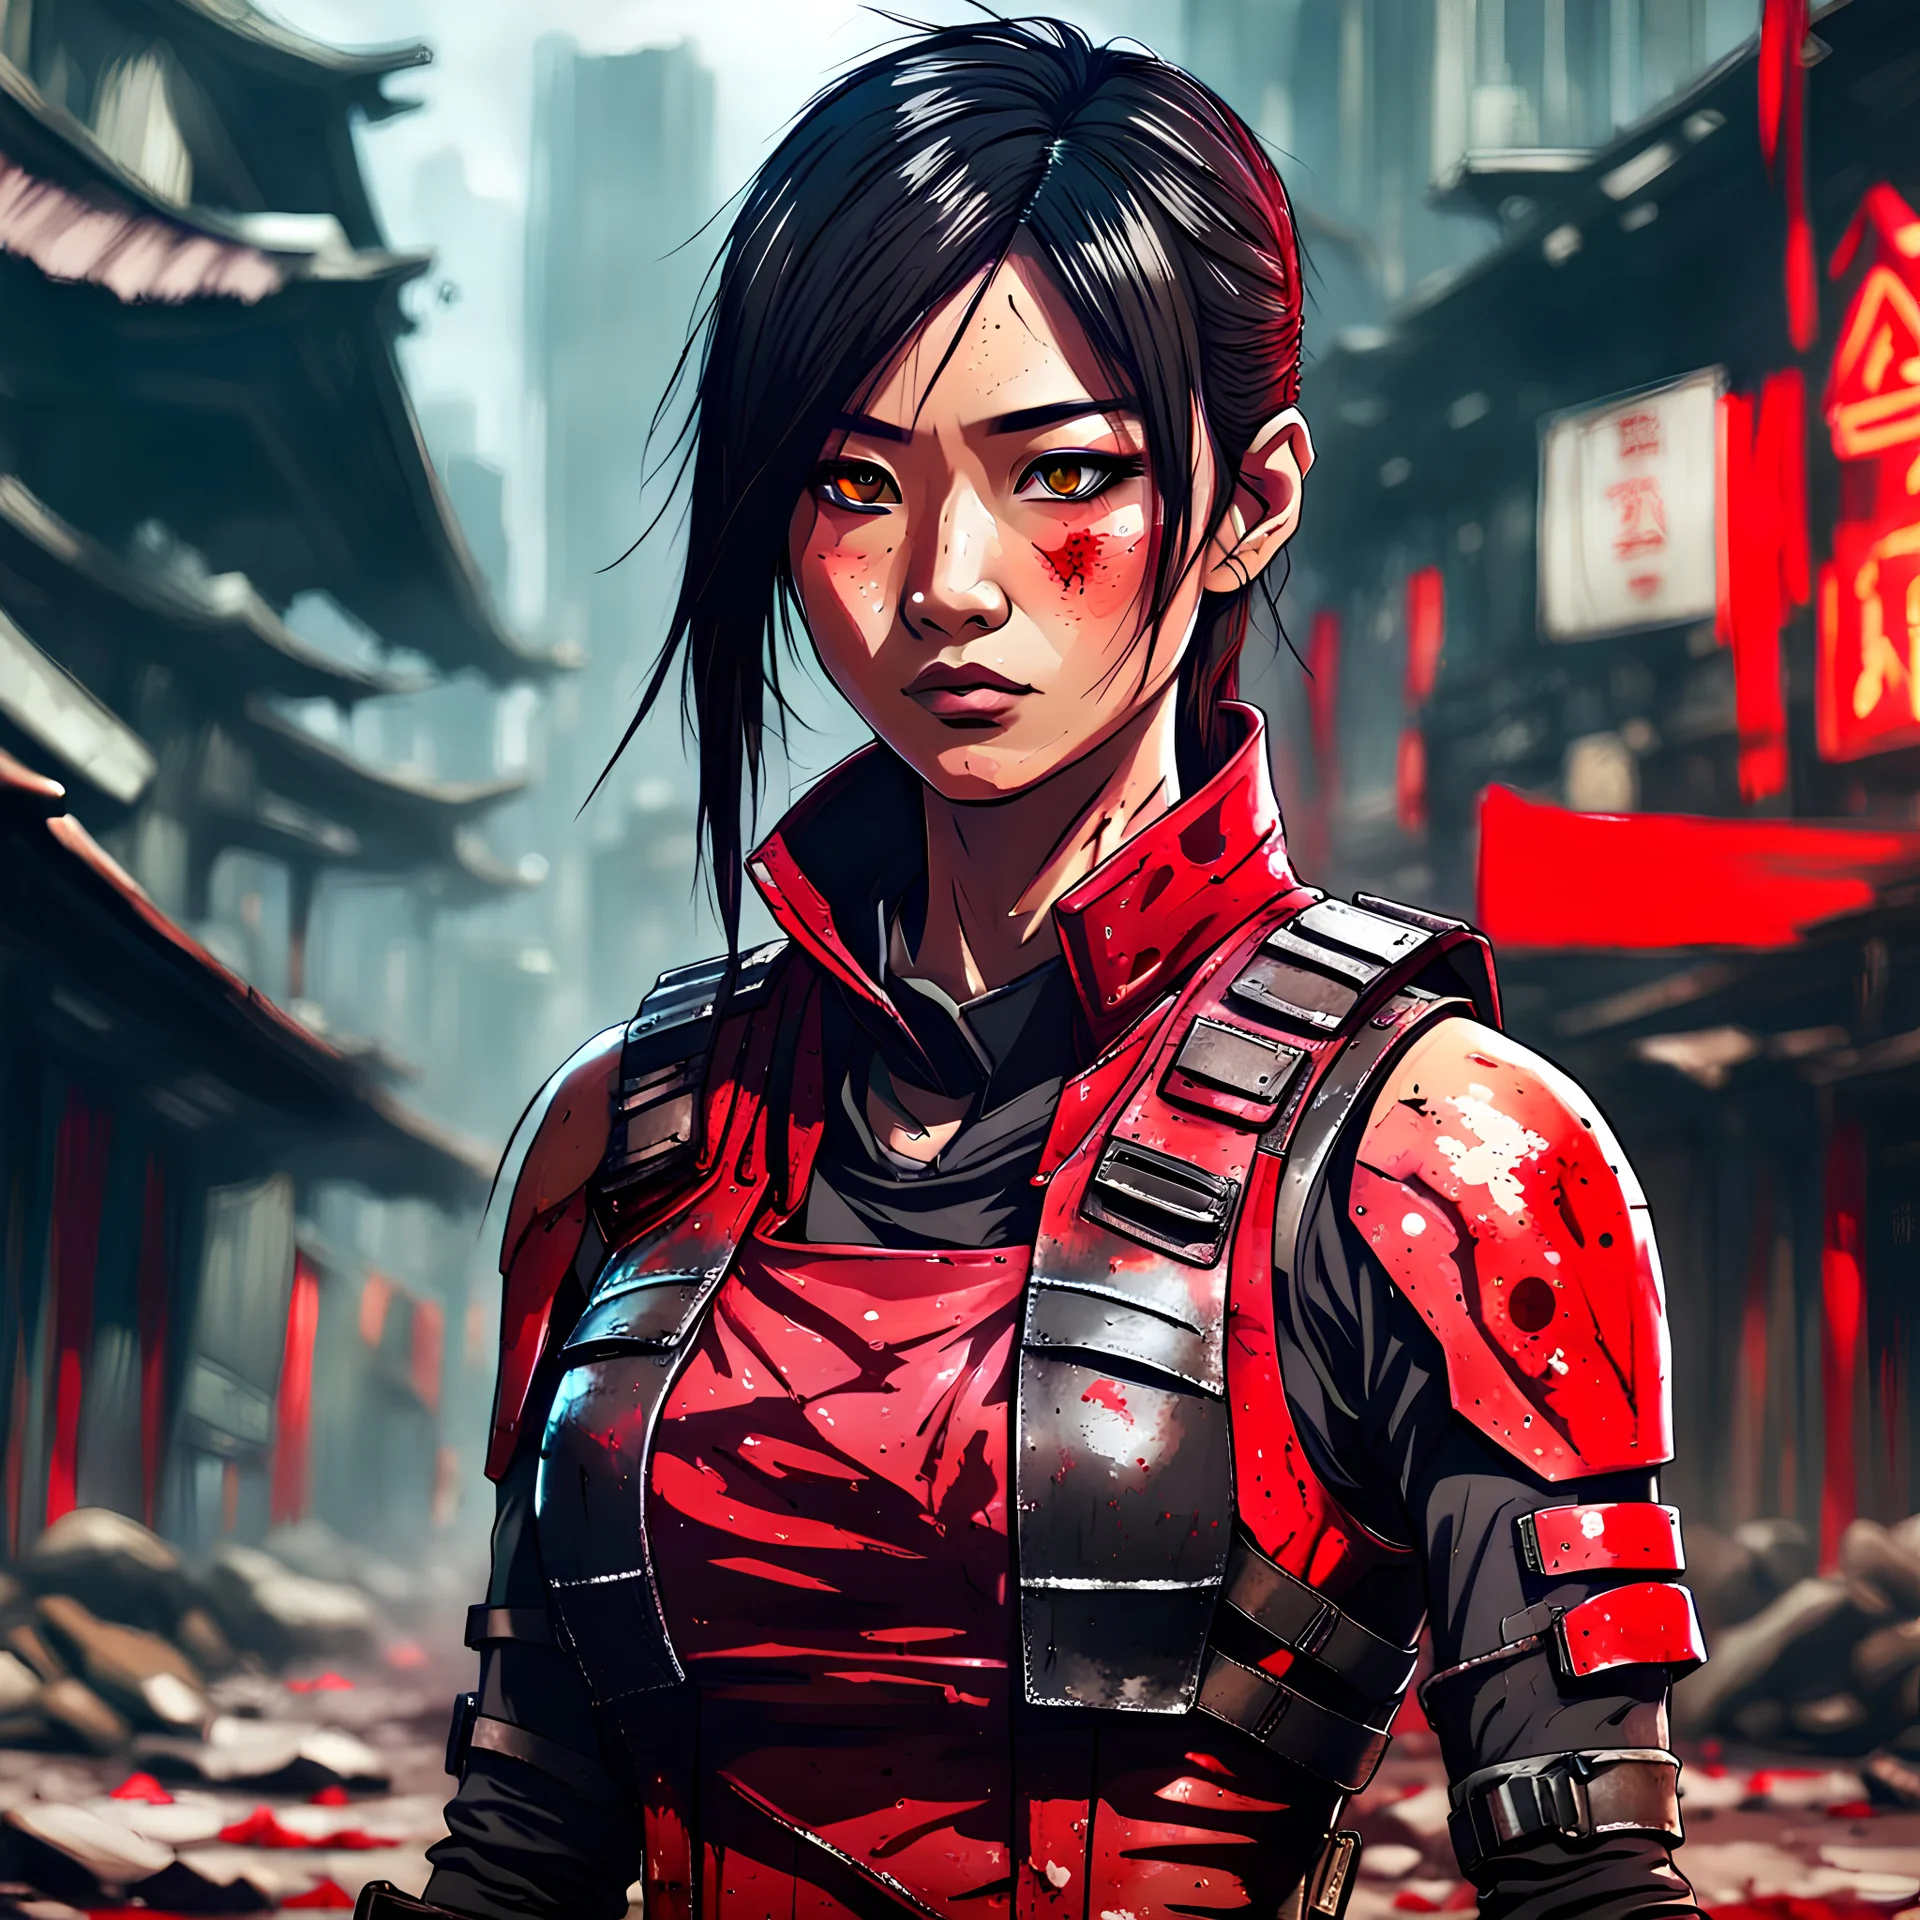 Futuristic battle-scarred blood-stained but optimistic Vietnamese female assassin, sly half-smile, red and black bulletproof vest, post-apocalyptic background, anime style